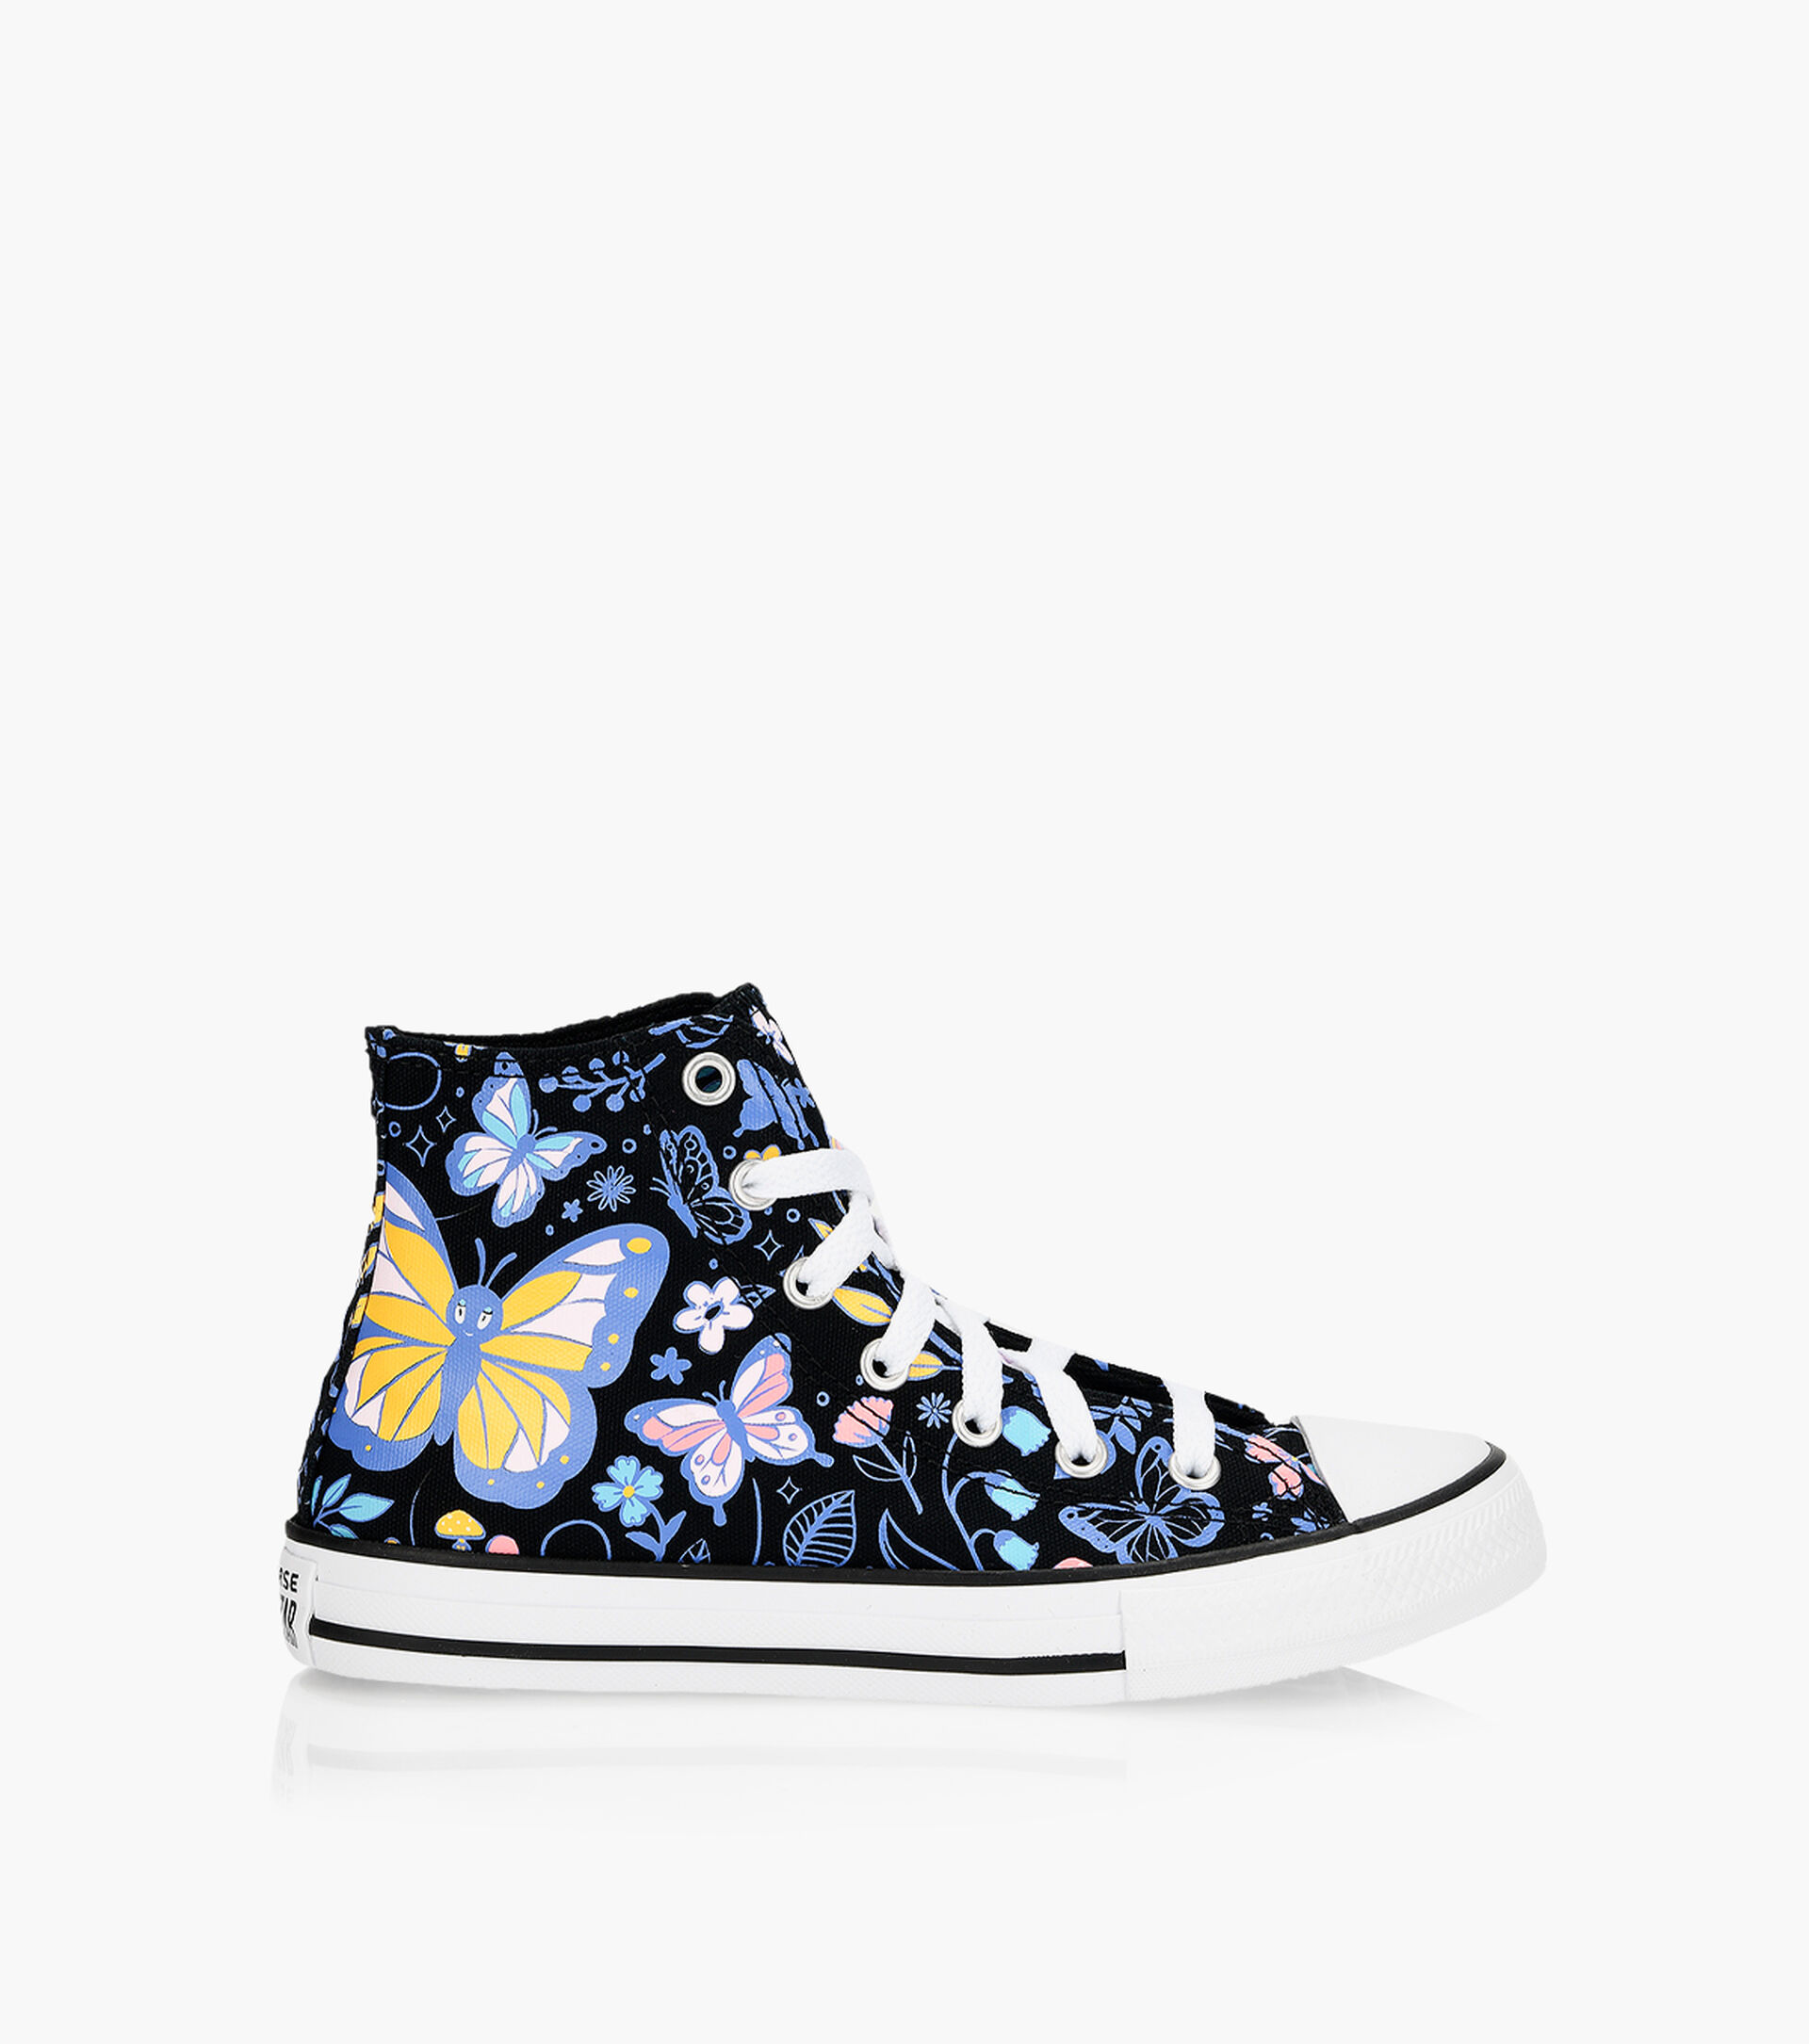 CONVERSE CHUCK TAYLOR ALL STAR BUTTERFLY FUN HI - Black | Browns Shoes